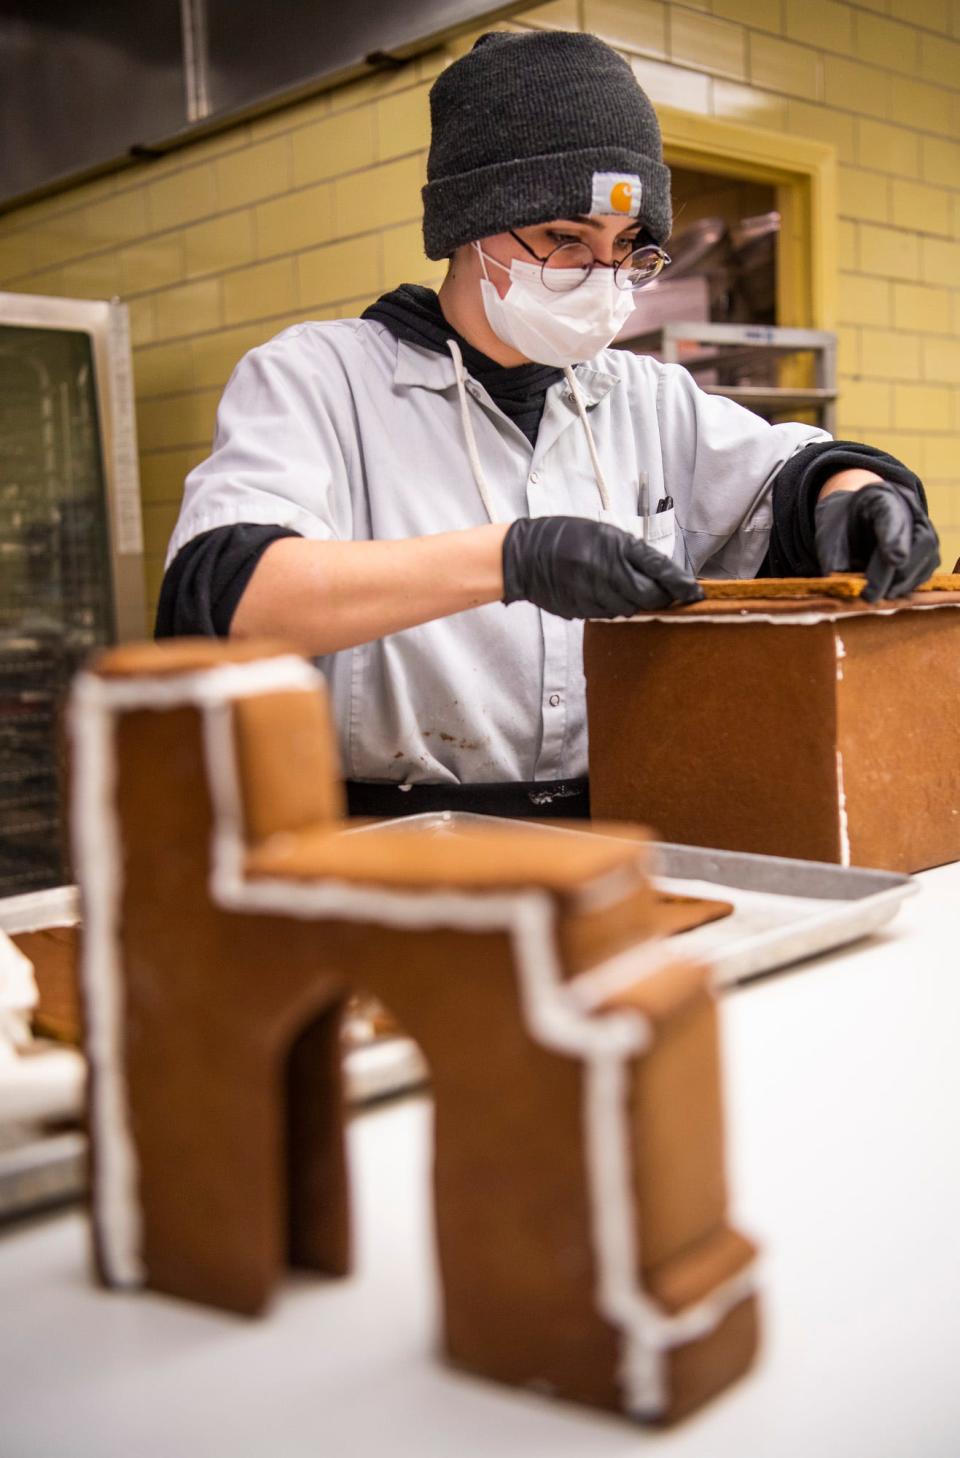 Rocket Baucco works on building Indiana University structures while creating a sprawling gingerbread scene under the direction of Chef Hayden Kemerly at the Indiana Memorial Union on Tuesday, Nov. 29, 2022. The finished candy creation will be on display Thursday night for the Light Up The Night lighting ceremony. 